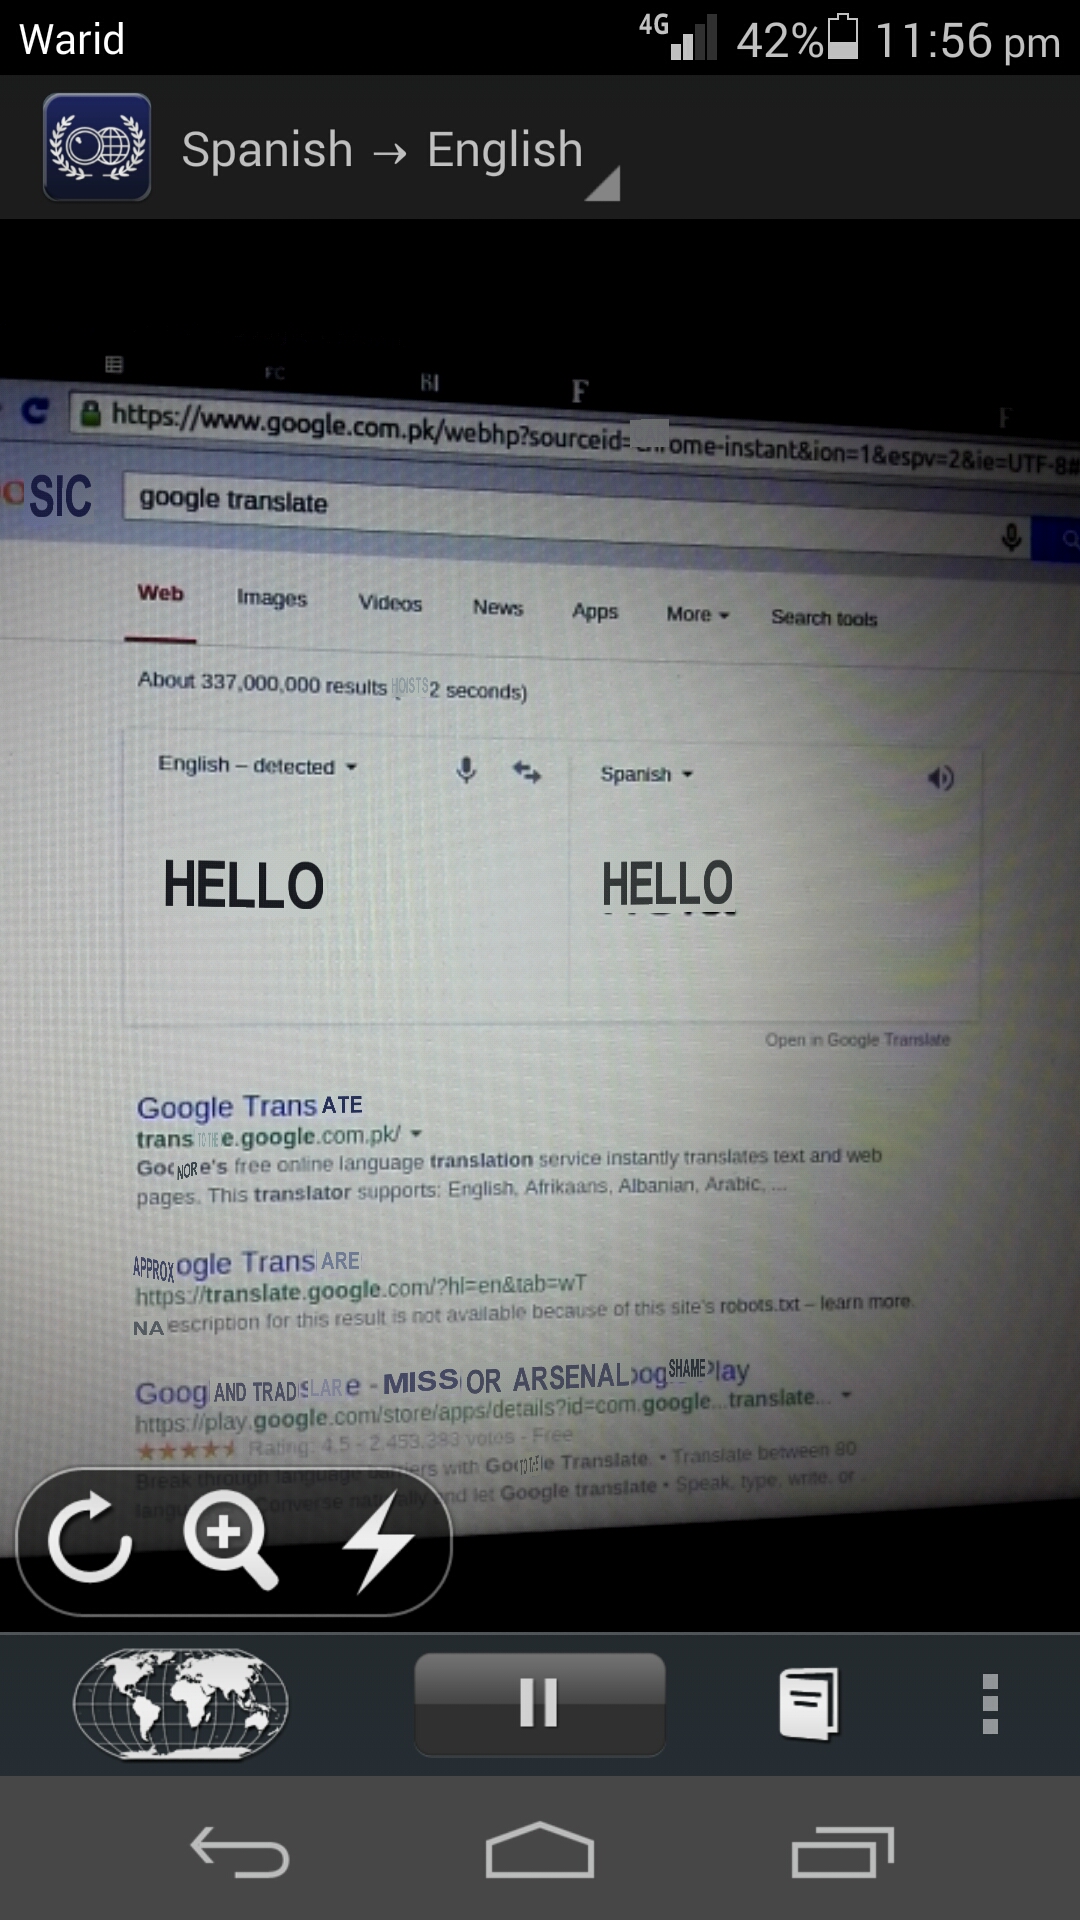 World Lens translating Spanish text to English. The text on the right was the Spanish word for hello, which has been translated to the English word hello.